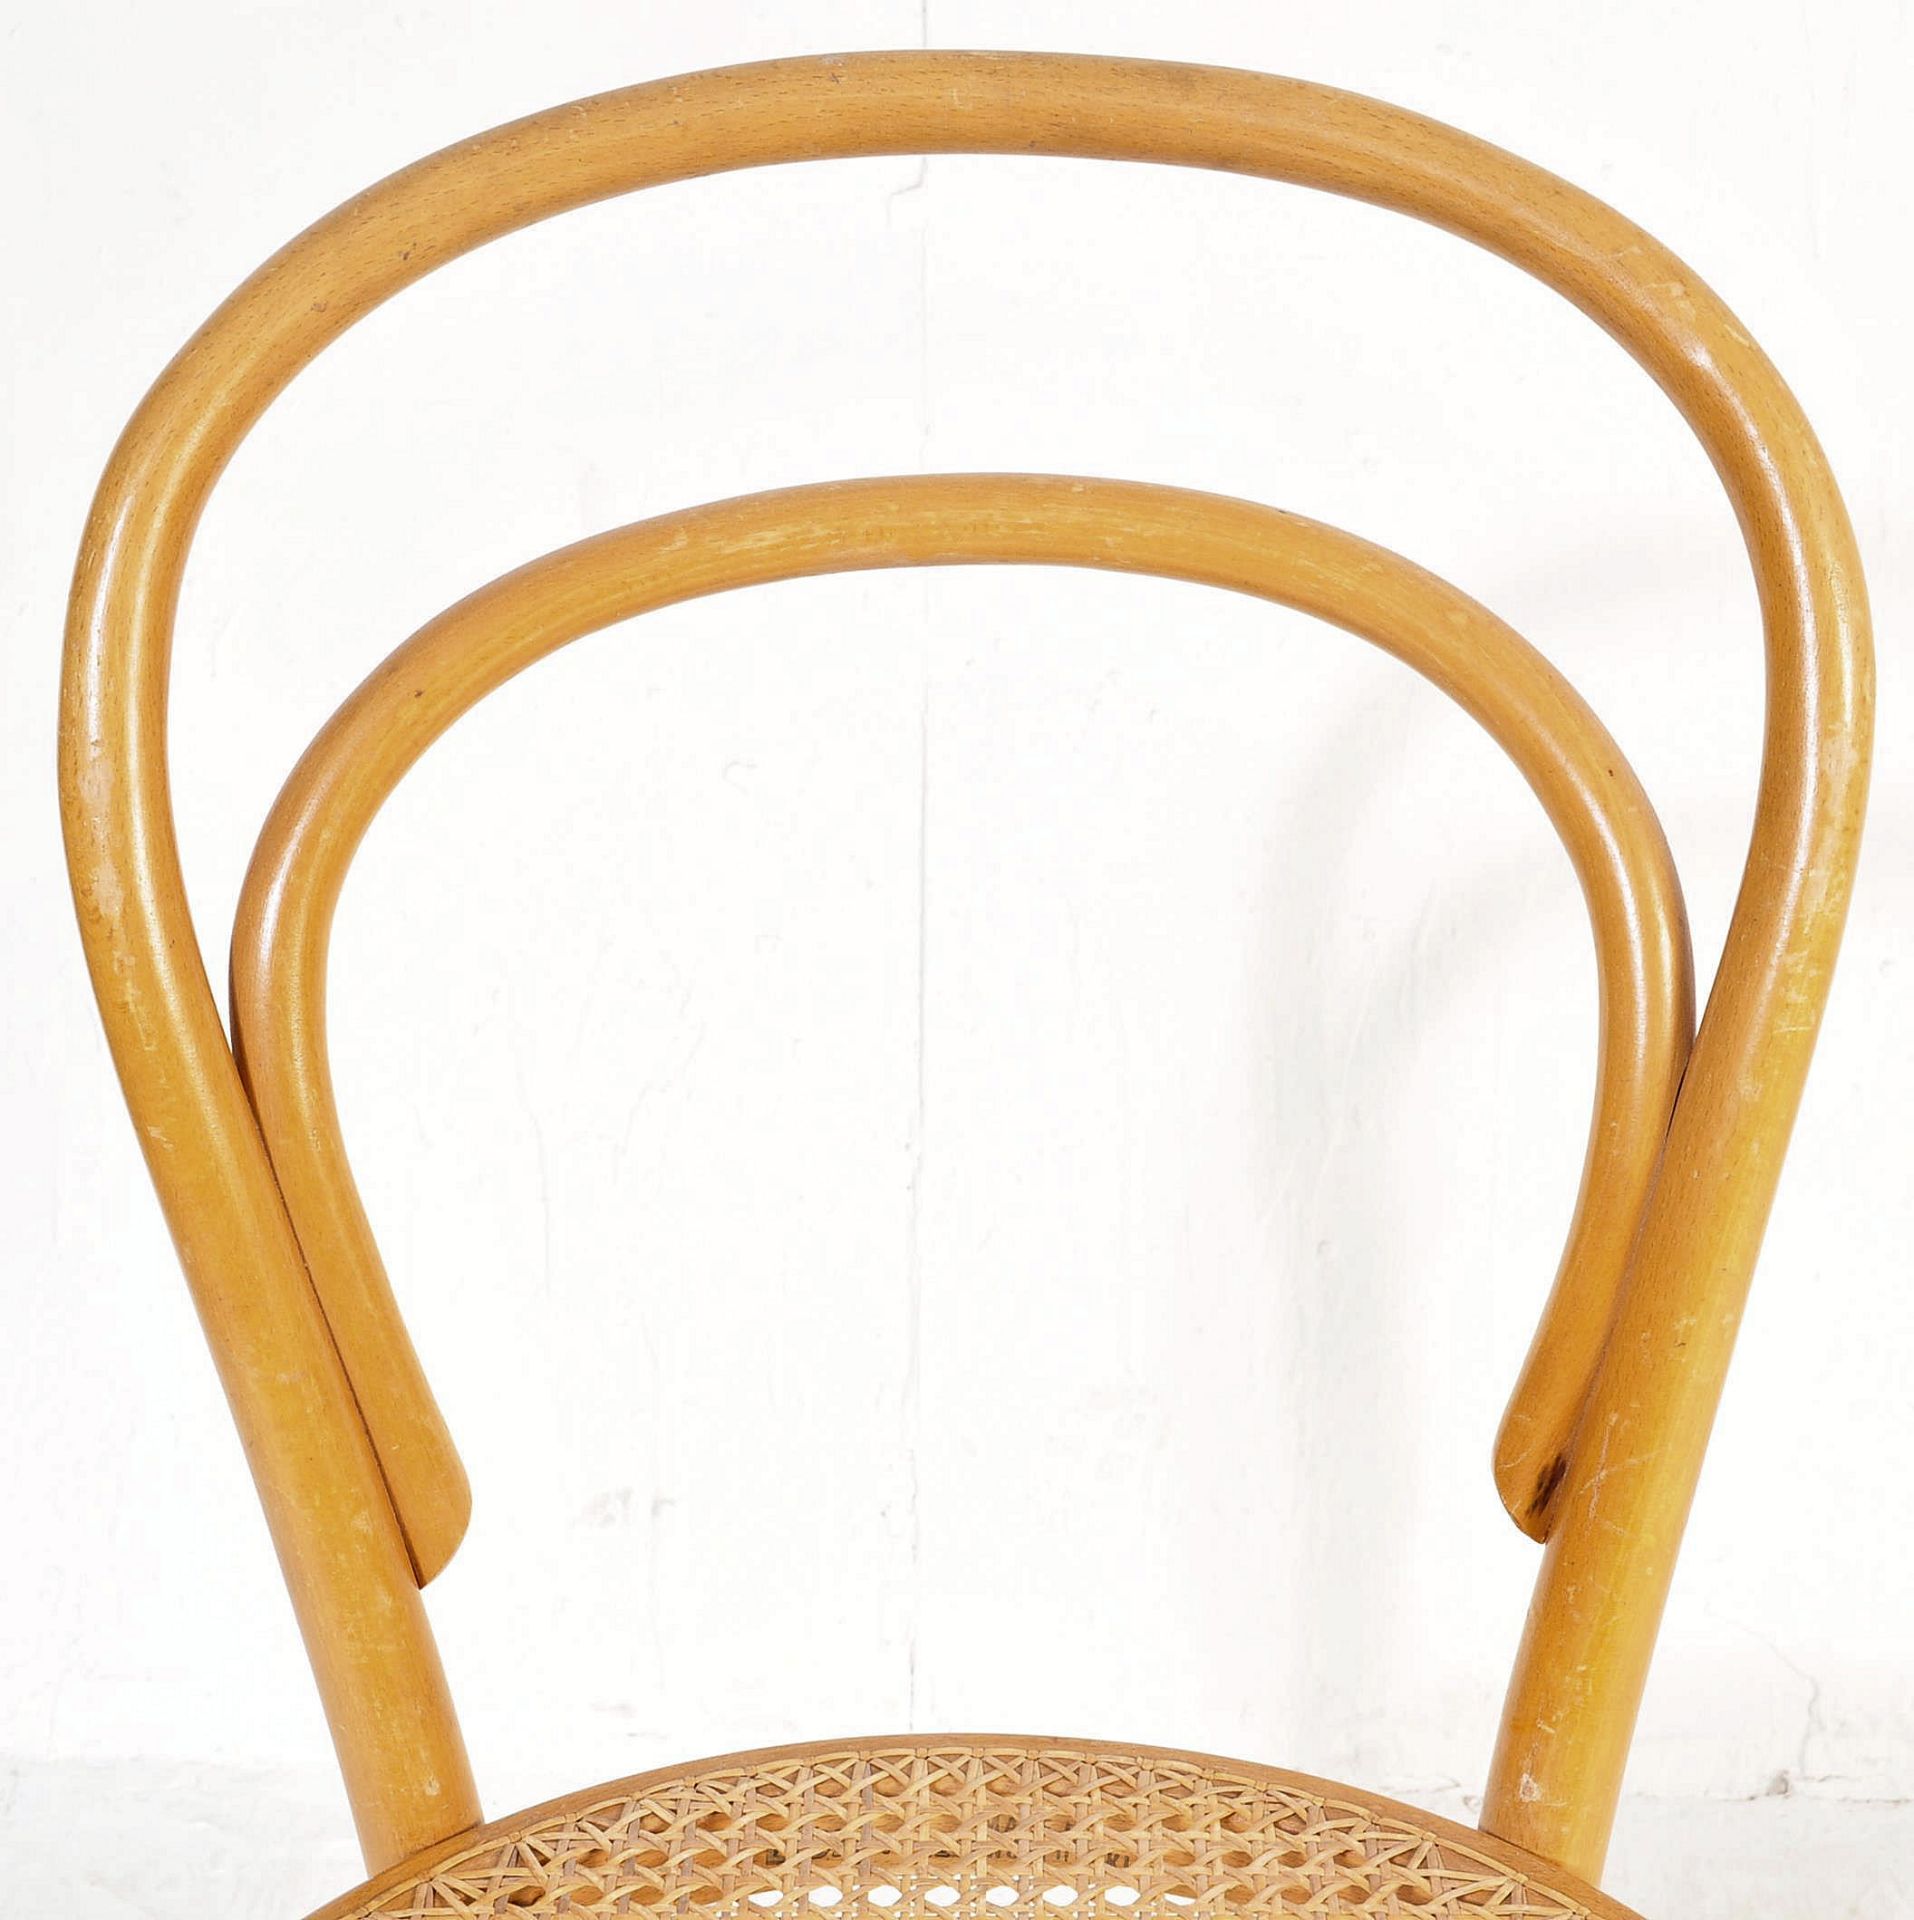 HARLEQUIN SET OF RETRO VINTAGE MID 20TH CENTURY BENTWOOD DINING CHAIRS - Image 10 of 11